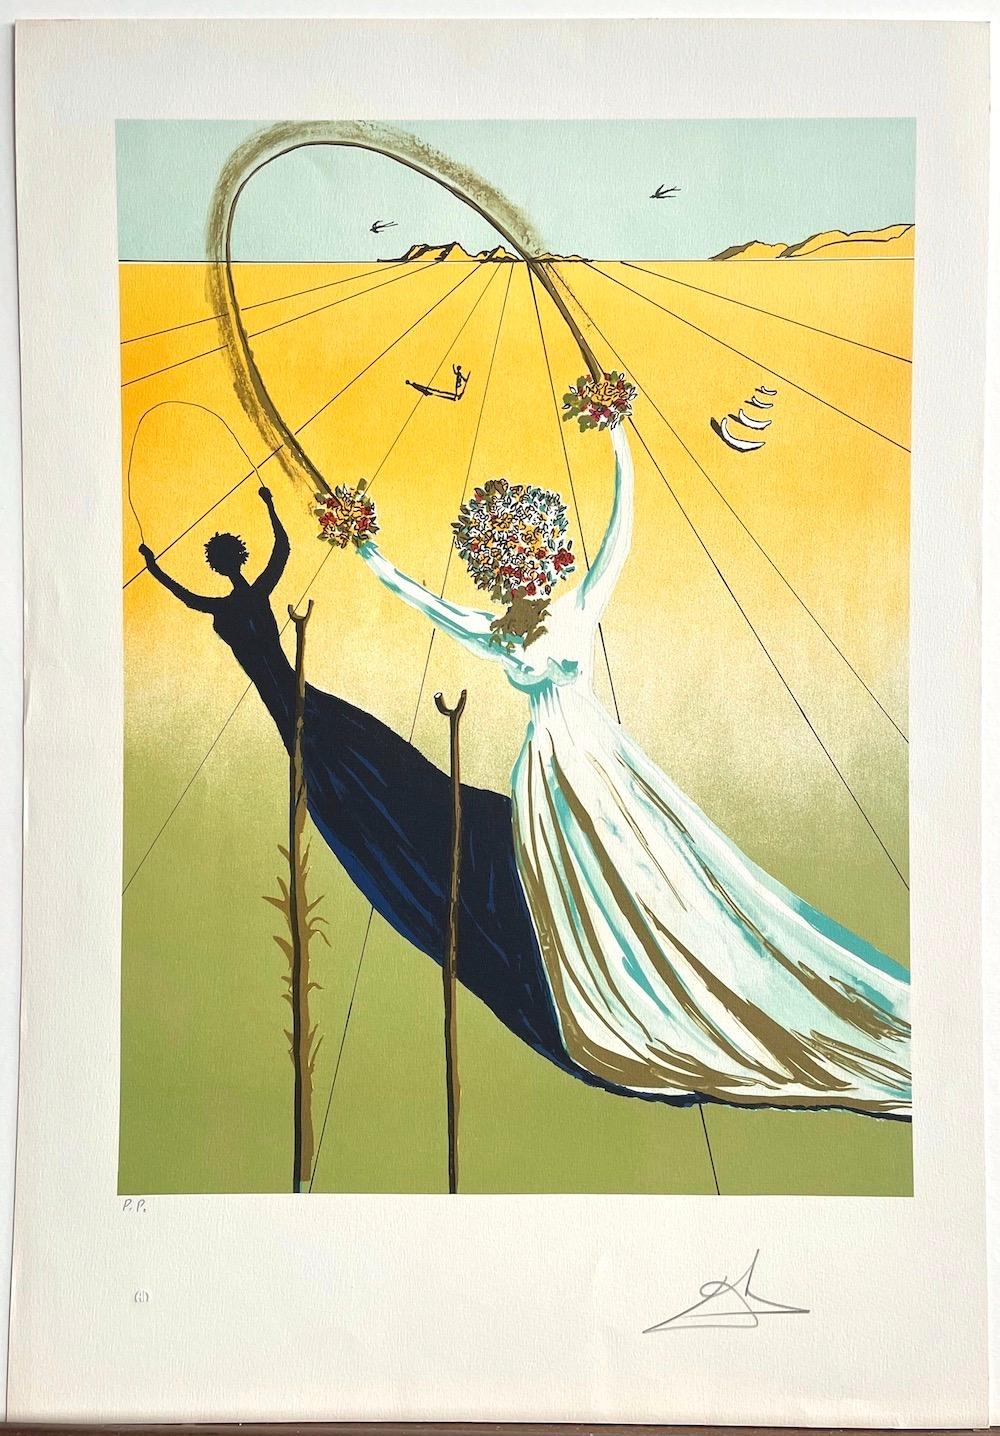 DREAM PASSAGE is a limited edition color lithograph by the Modern master Salvador Dali, printed using hand lithography techniques on archival Arches printmaking paper, 100% acid free. DREAM PASSAGE portrays a surreal portrait of a female figure